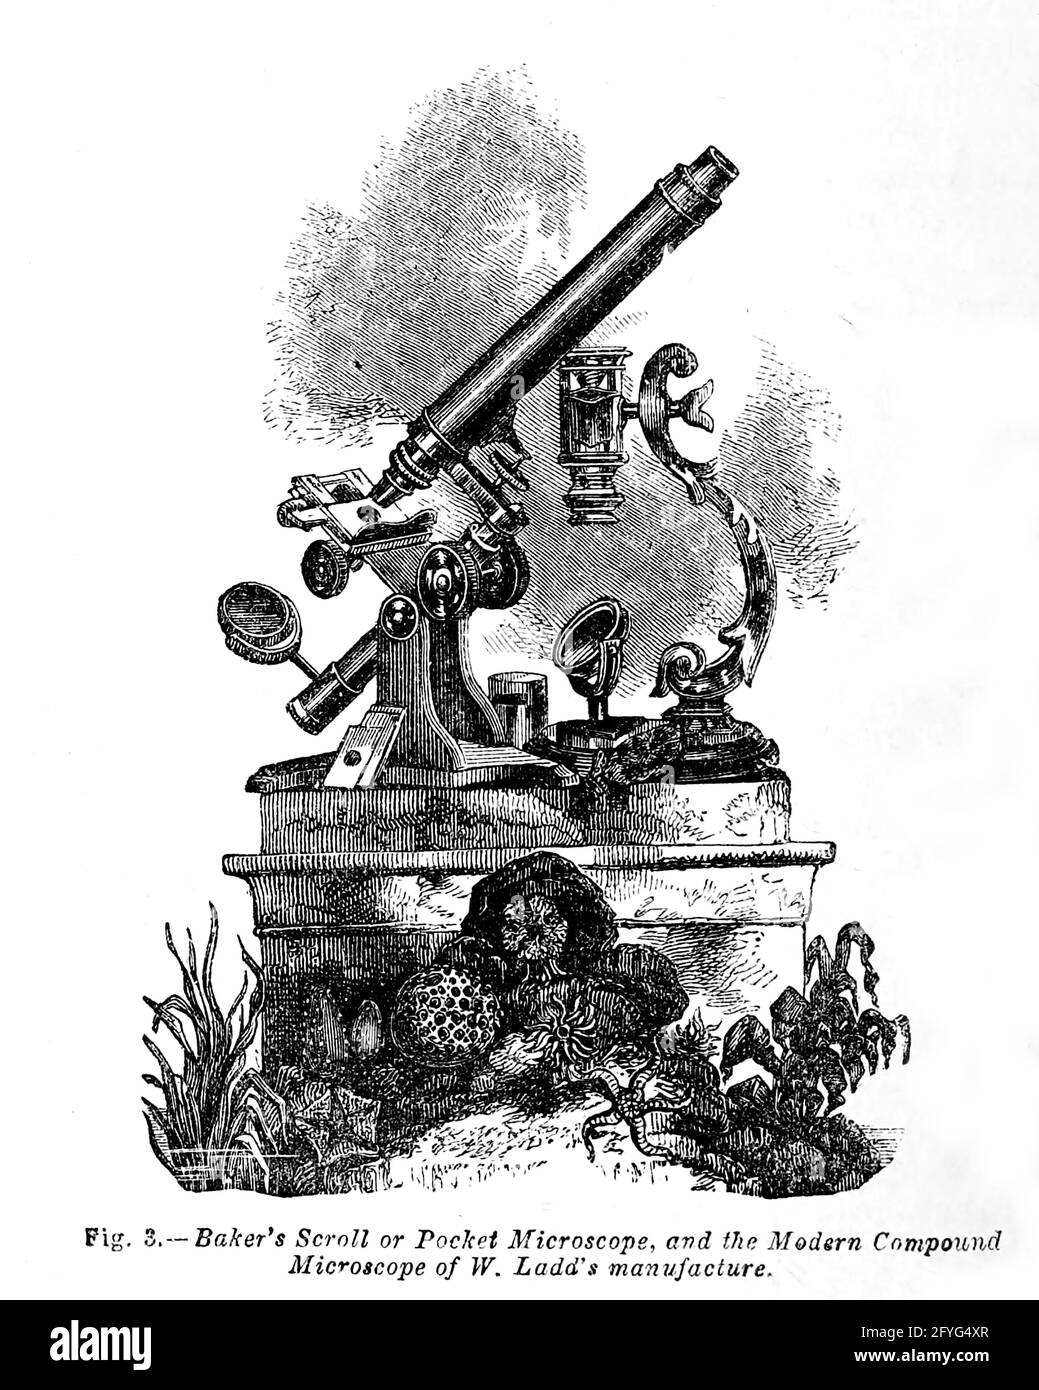 Baker's Scroll or Pocket Microscope, and the Modern Compound Microscope of W. Ladd's manufacture From the book '  The microscope : its history, construction, and application ' by Hogg, Jabez, 1817-1899 Published in London by G. Routledge in 1869 with Illustrations by TUFFEN WEST Stock Photo